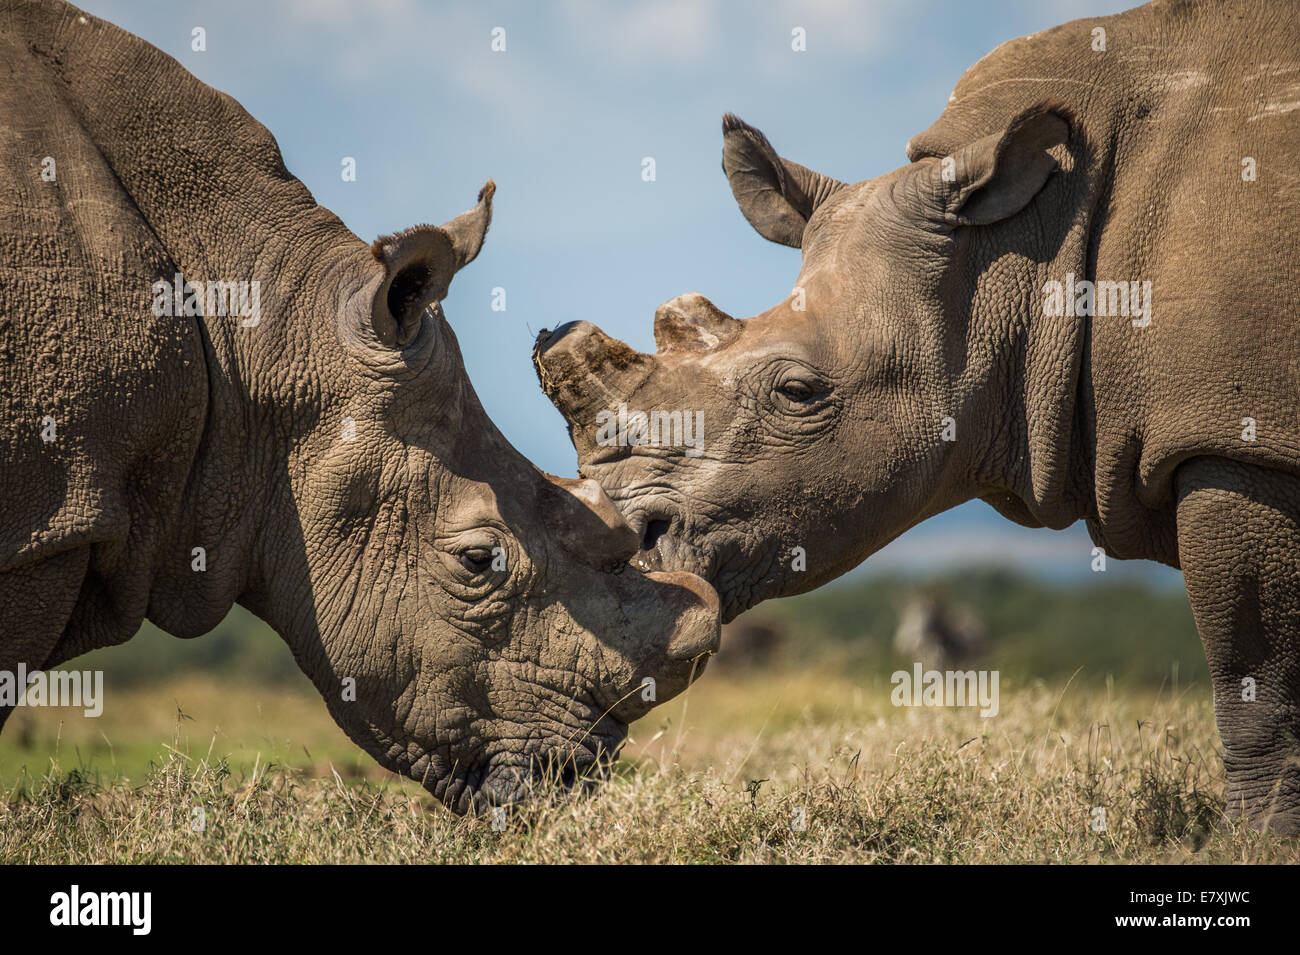 Sudan socializes with southern white rhinos at Ol Pejeta Nature Conservancy in Kenya, He is one of the last four Northern White  Stock Photo